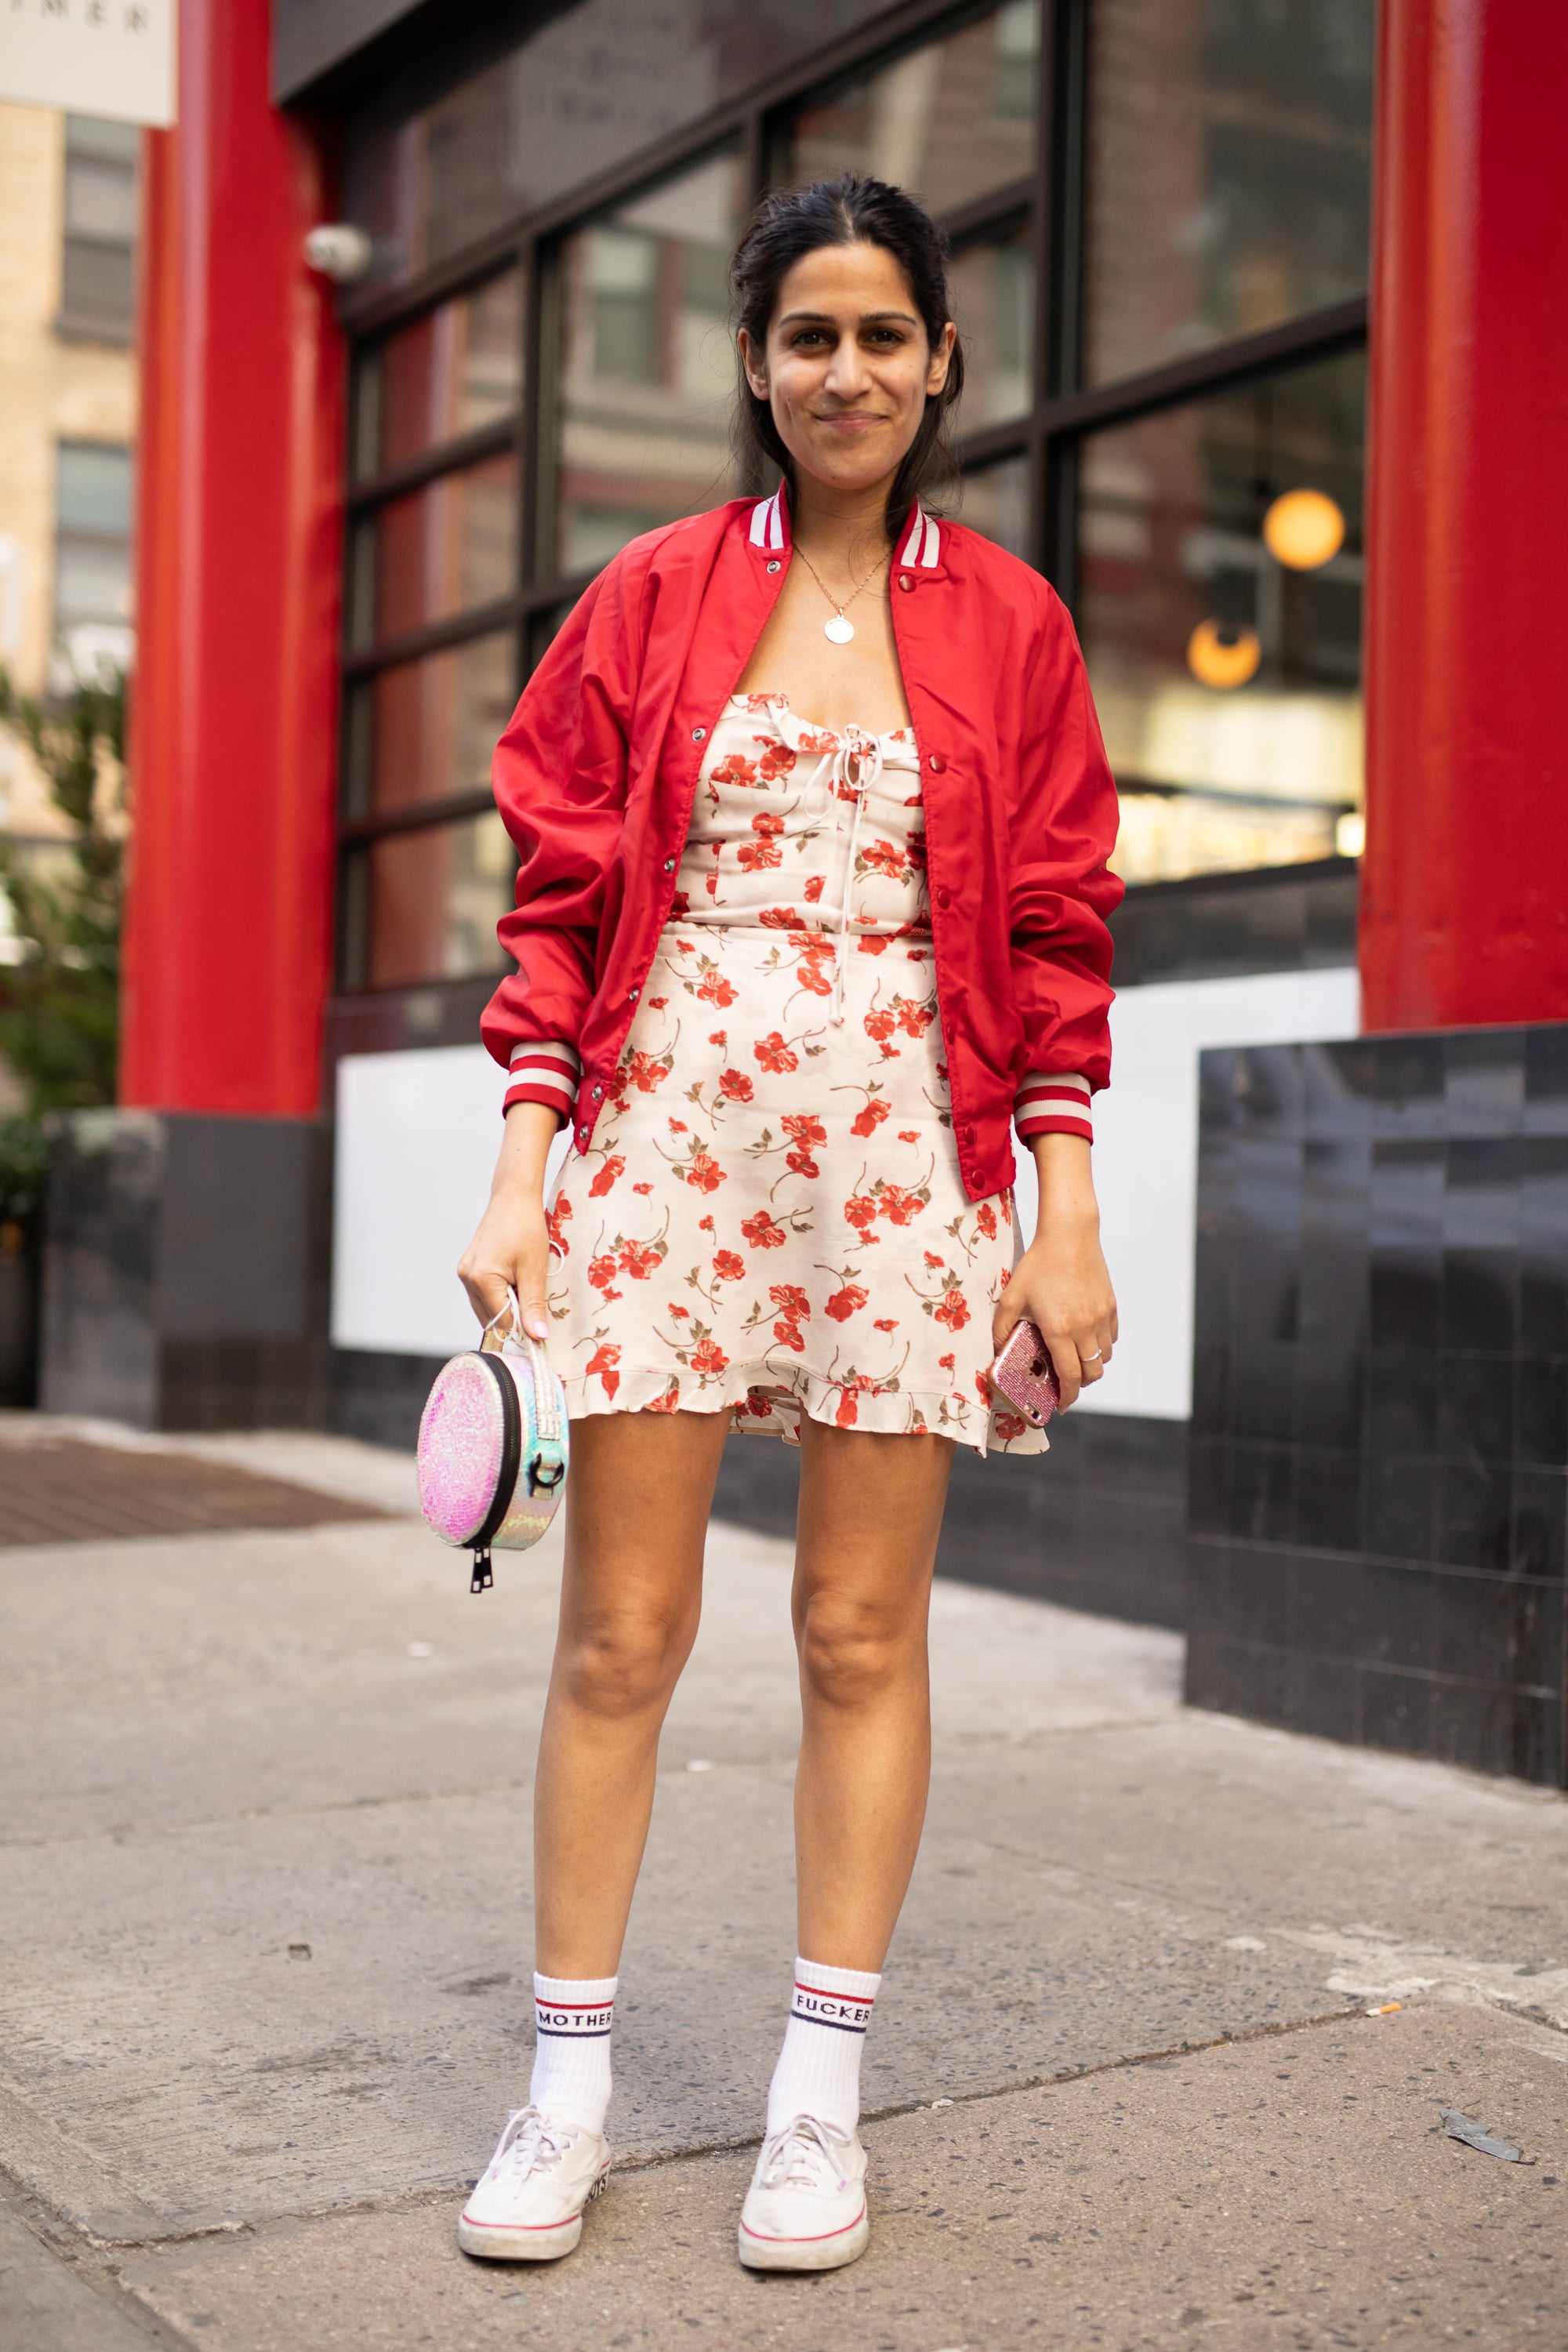 Hot Rainy Day Outfits: Lightweight Jacket